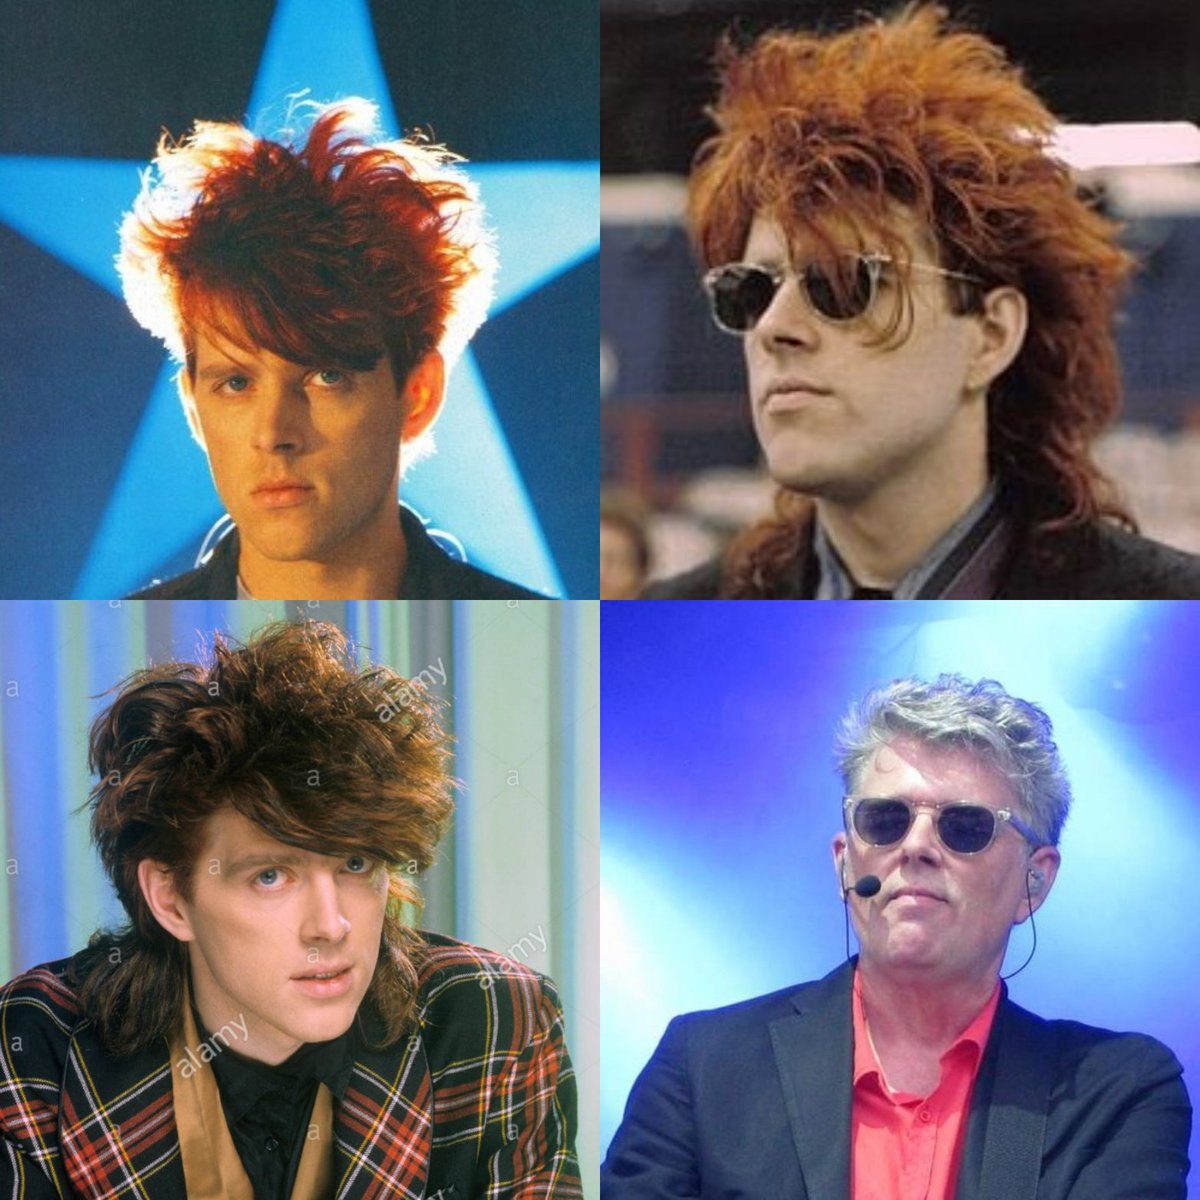 Happy birthday
to Tom Bailey
What are your favourite
#ThompsonTwins tracks?